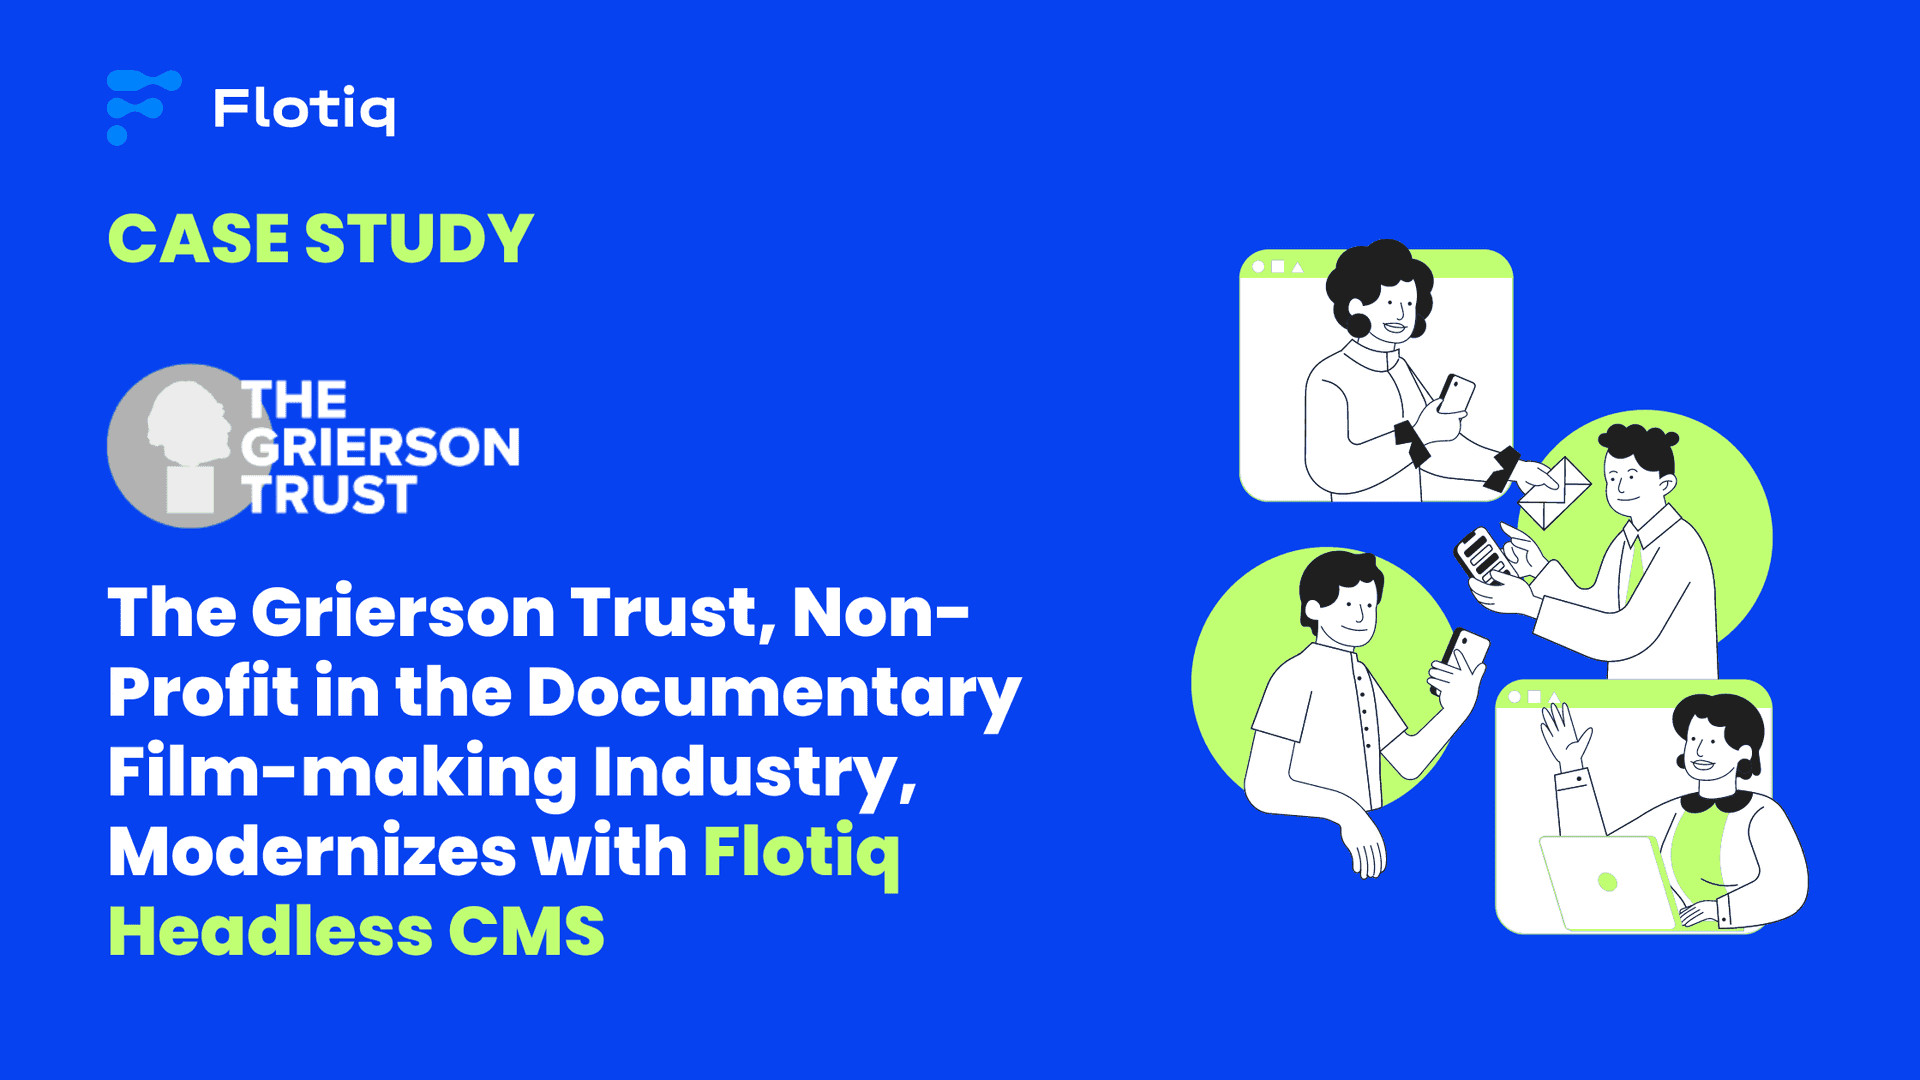 The Grierson Trust, Non-Profit in the Documentary Film-making Industry, Modernizes with Flotiq Headless CMS